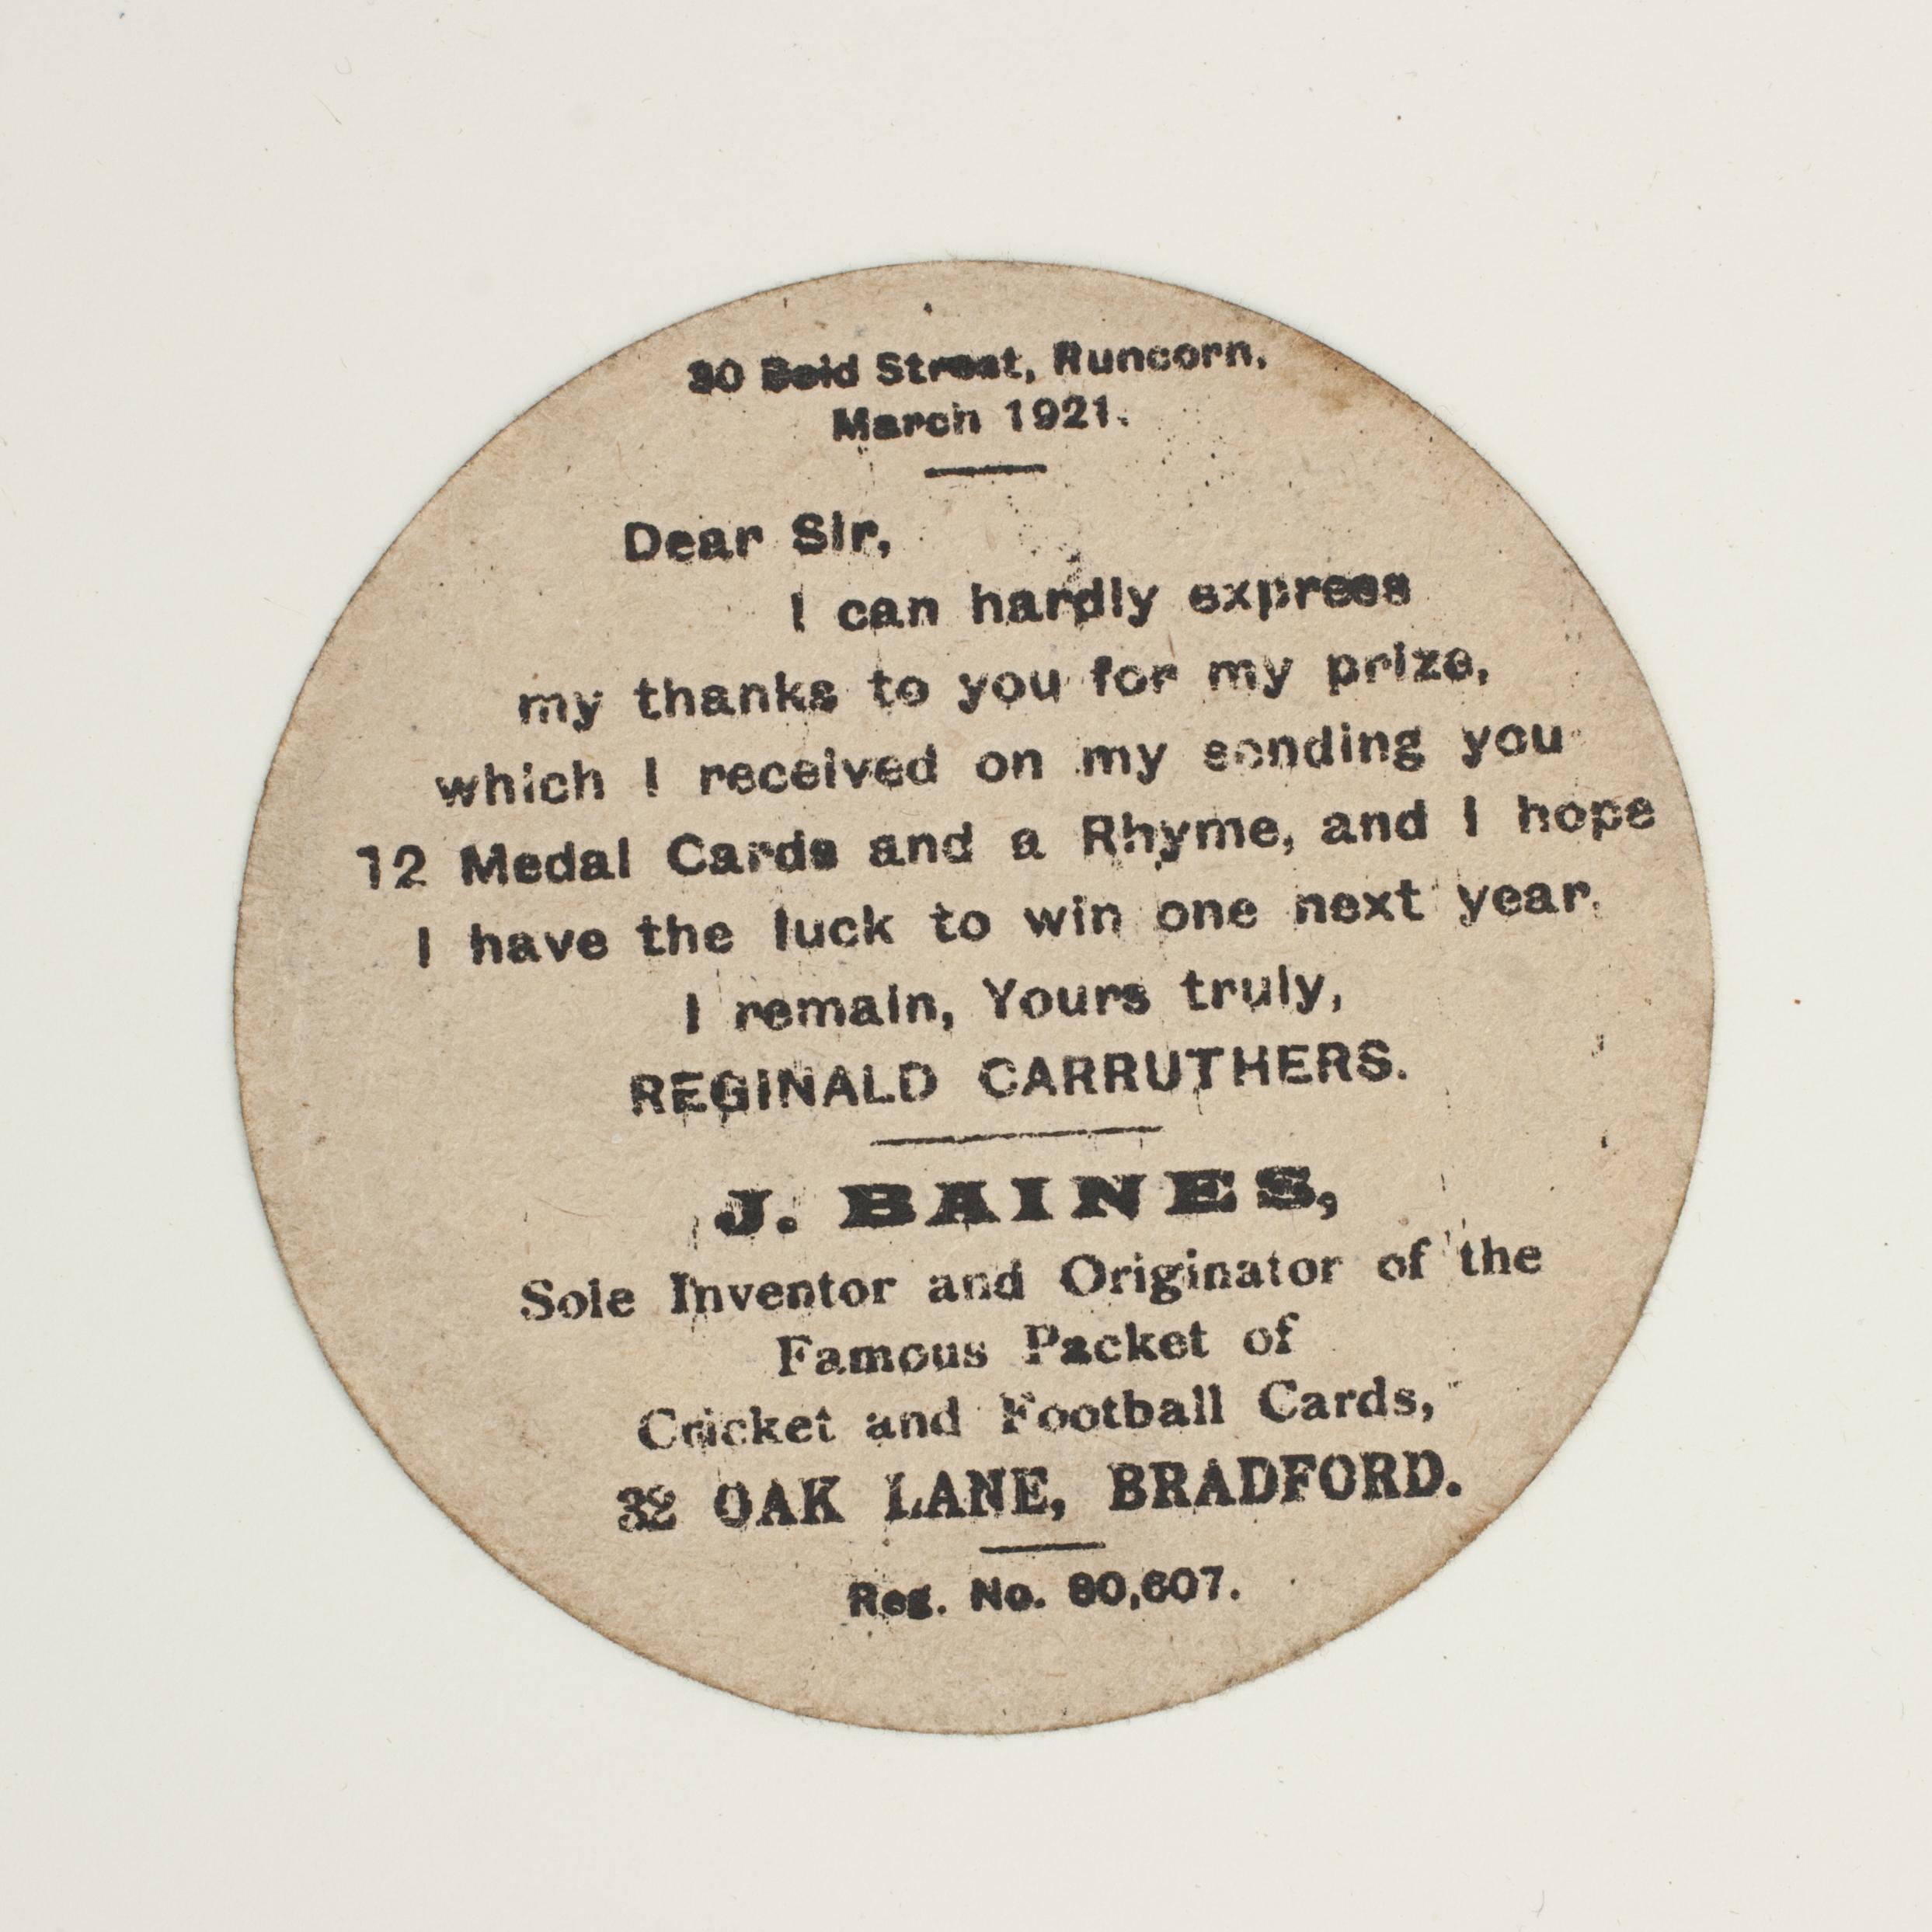 Baines football trade card, Third Lanark.
A rare circular football trade card in the shape of a leather football ball. Made by the toy shop owner from Bradford, John Baines. Baines went on to produce not only football cards but eventually covered